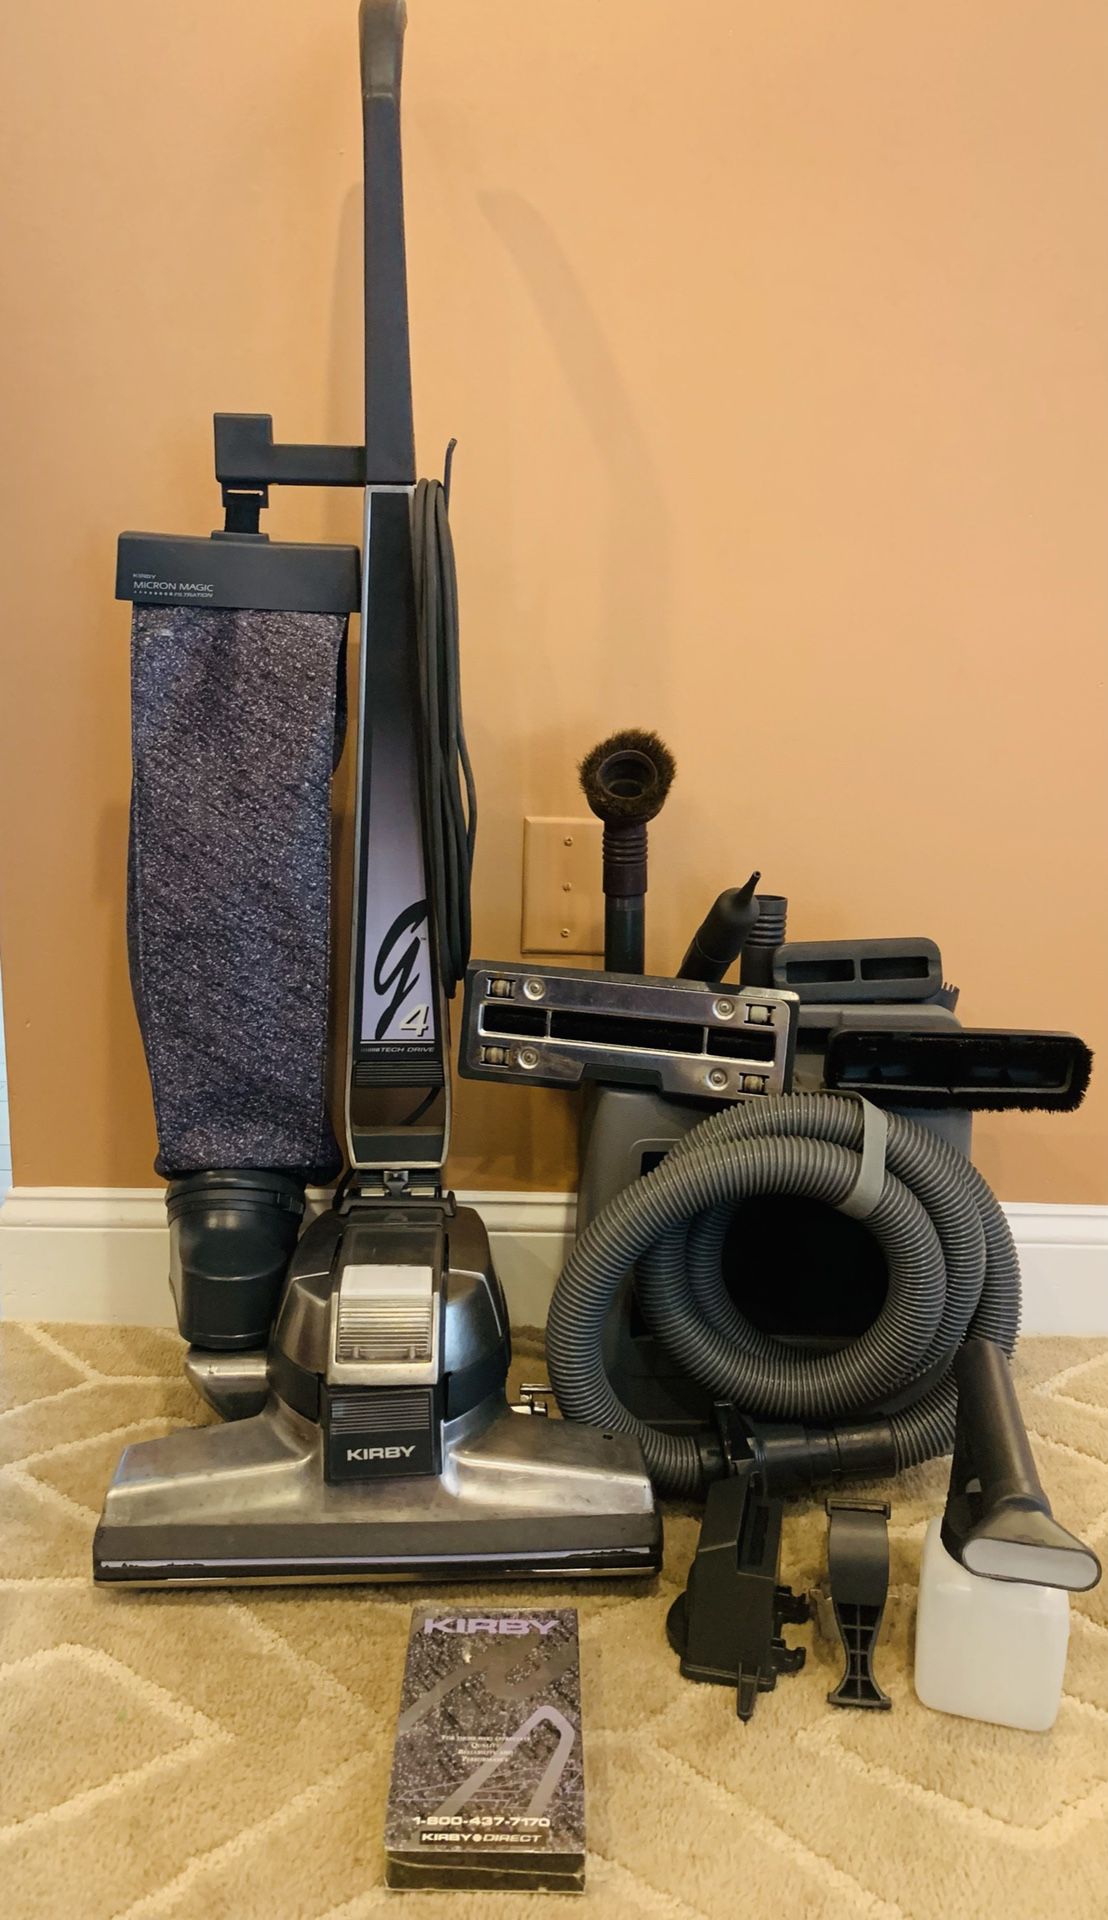 Kirby G4 vacuum cleaner with attachments and shampooer